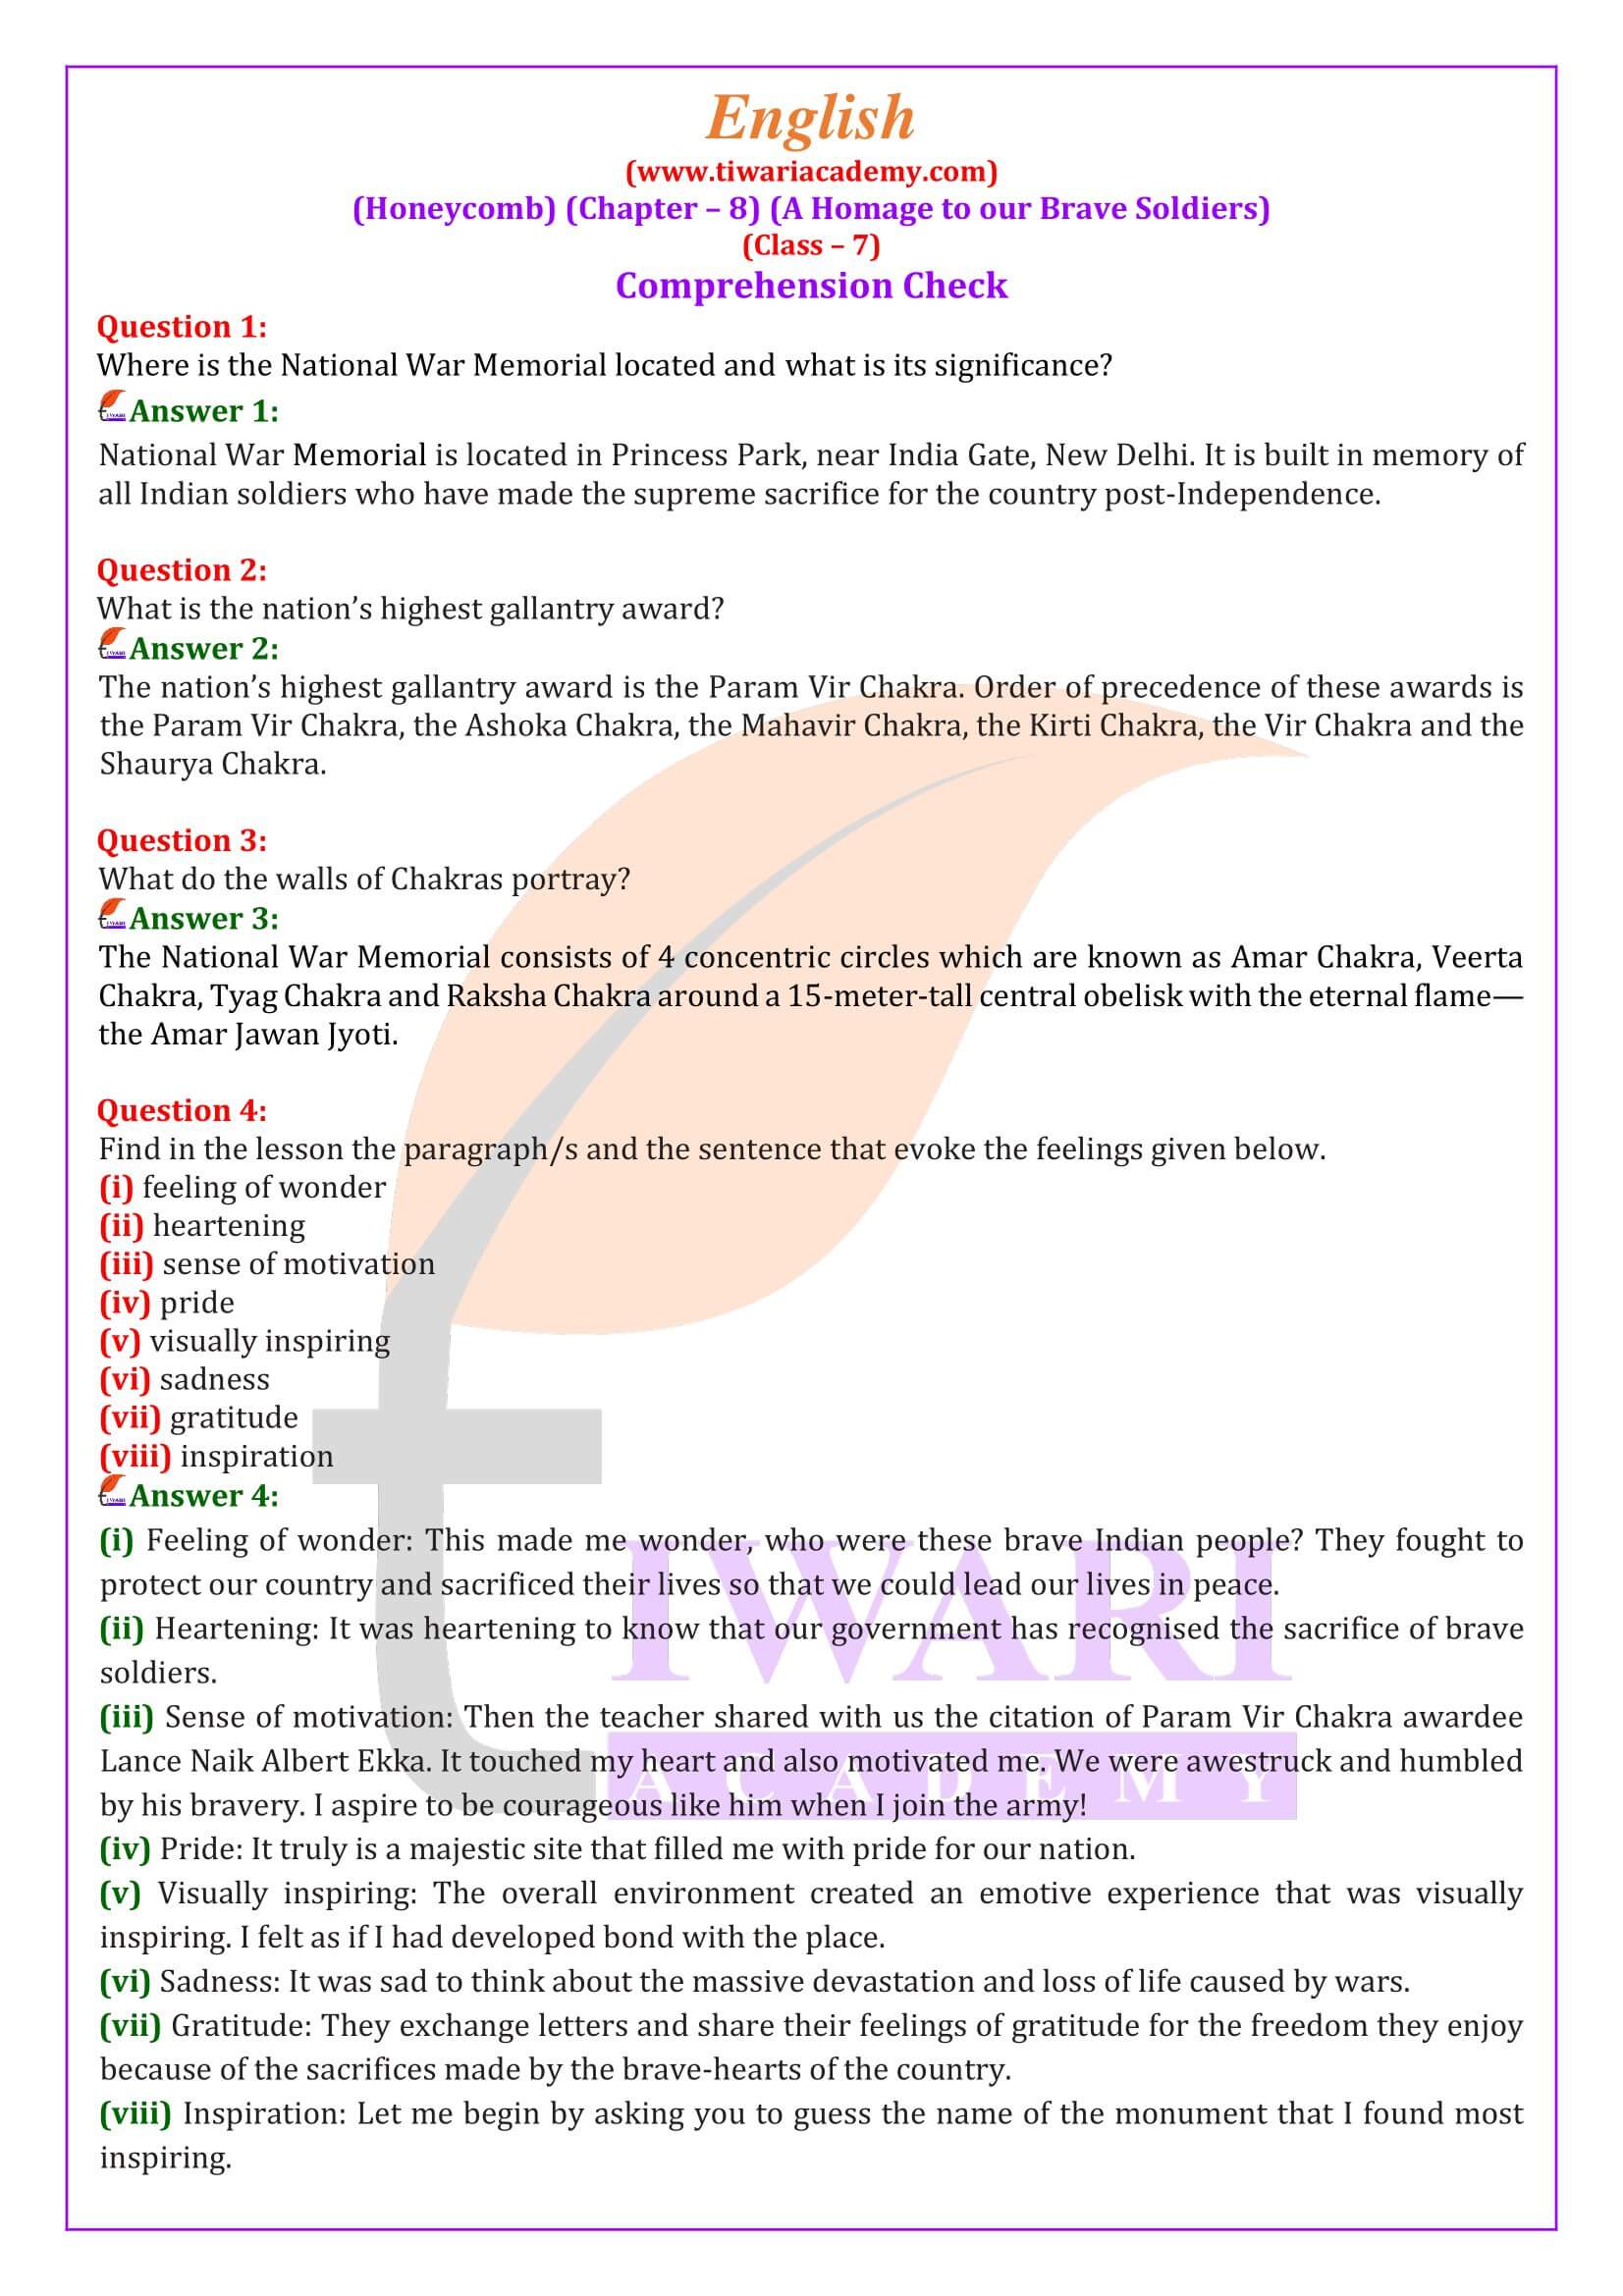 NCERT Solutions for Class 7 English Honeycomb Chapter 8 A Homage to our Brave Soldiers